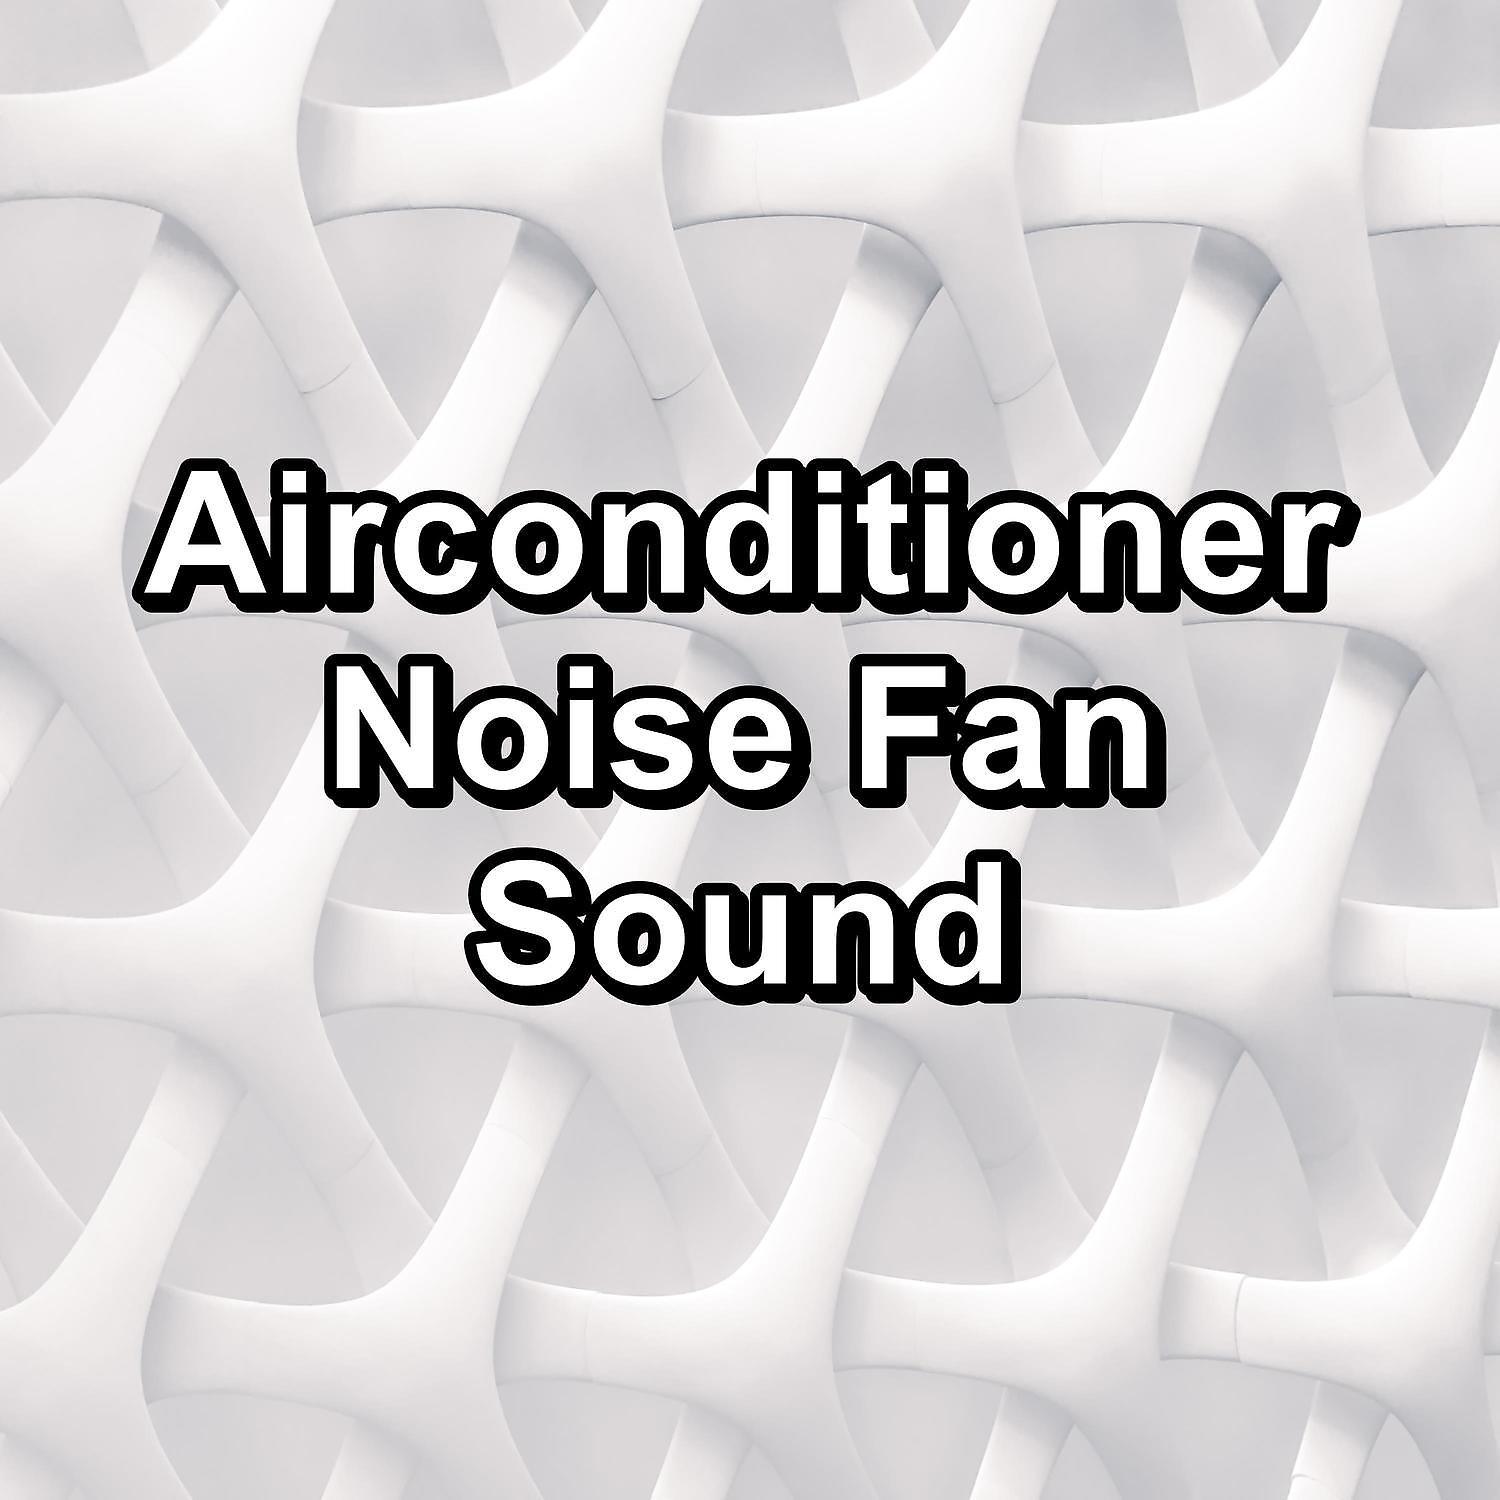 Pink Noise Sound, White Noise Sound, Brown Noise Sound - Blue Noise to Loop Best Sound to Loop